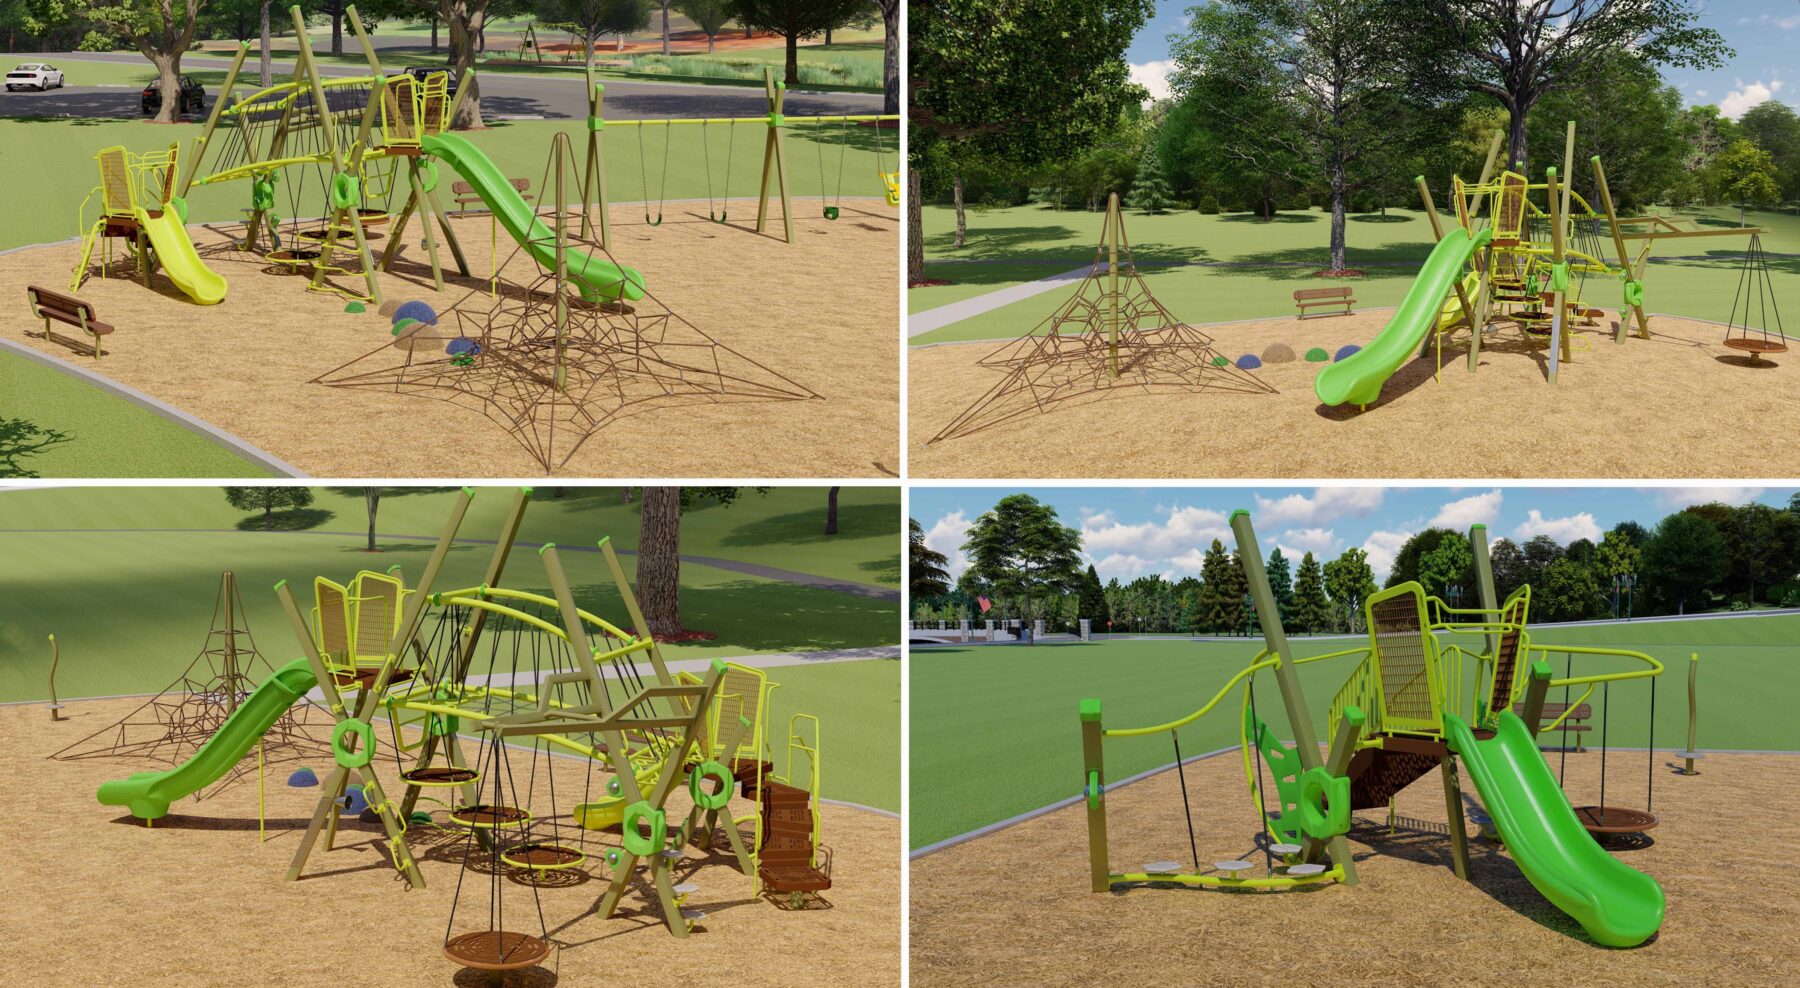 three-dimensional vignettes of the selected play equipment, including close-ups of the net climber, 2-5 climbing structure, and 5-12 climbing structure.